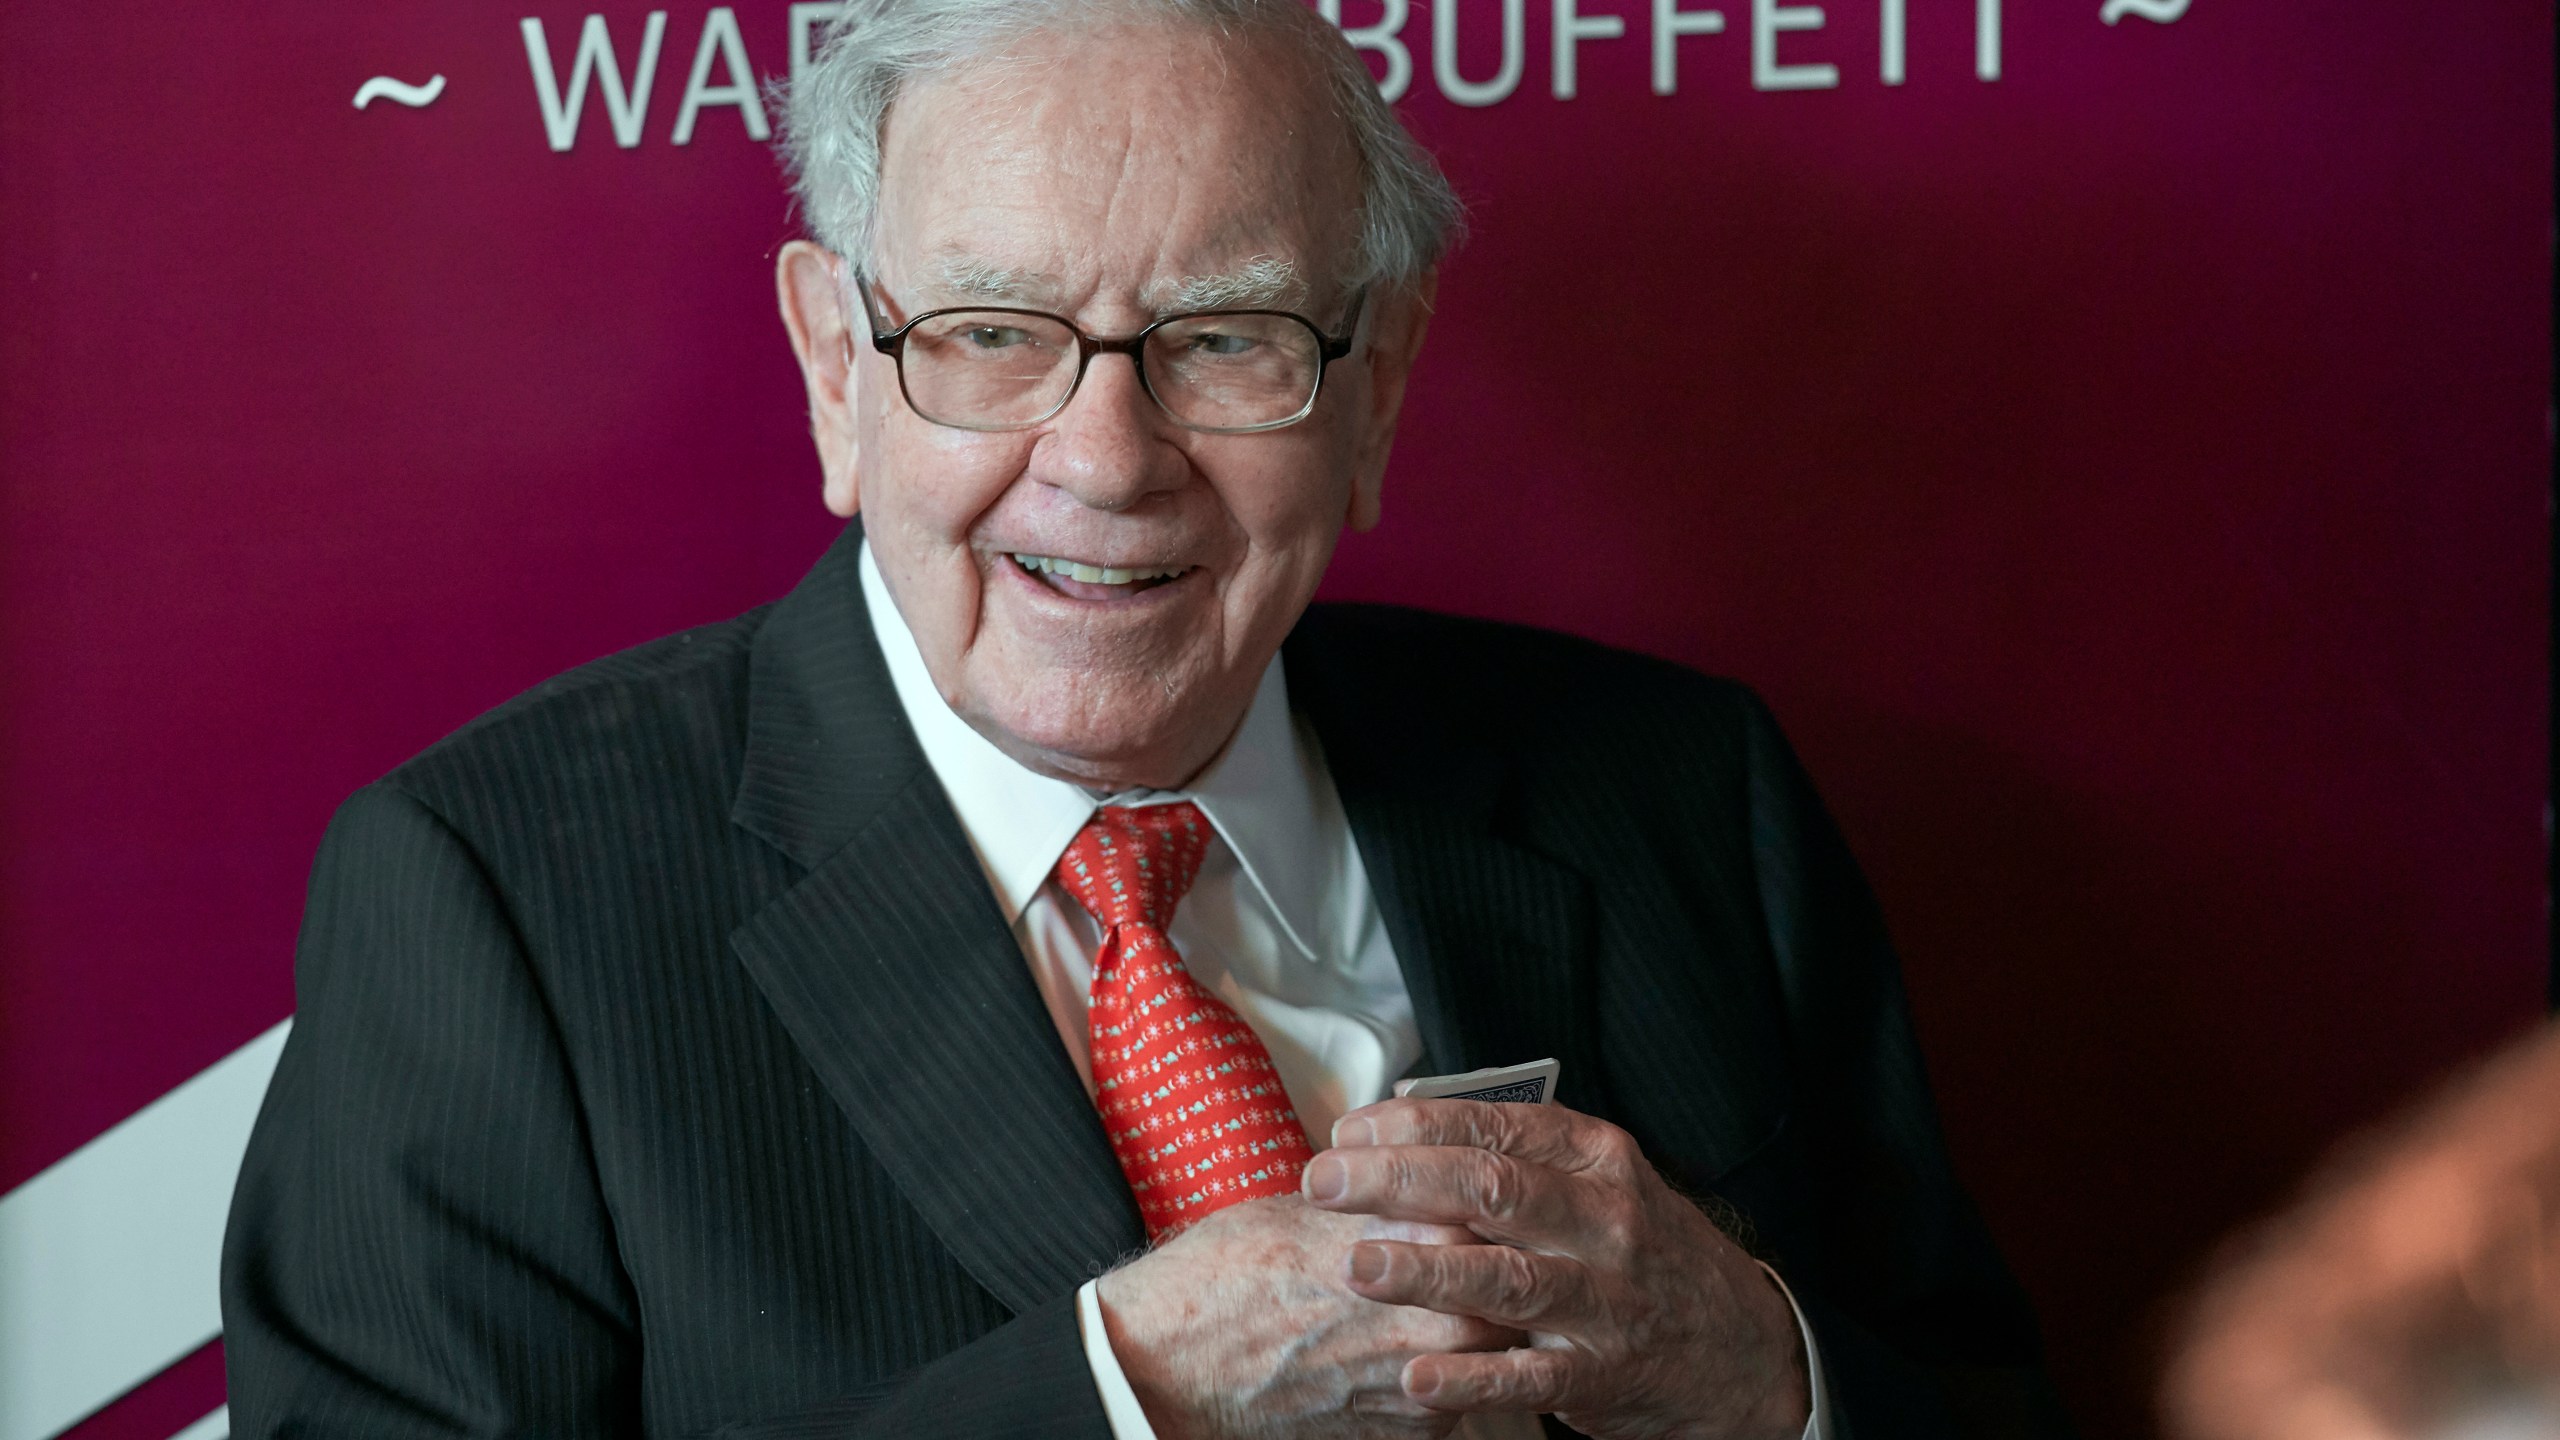 FILE - Warren Buffett, chairman and CEO of Berkshire Hathaway, smiles as he plays bridge following the annual Berkshire Hathaway shareholders meeting in Omaha, Neb., May 5, 2019. Buffett is giving away another $5.3 billion worth of Berkshire Hathaway stock to five foundations in accordance with his longtime giving plan. (AP Photo/Nati Harnik, File)